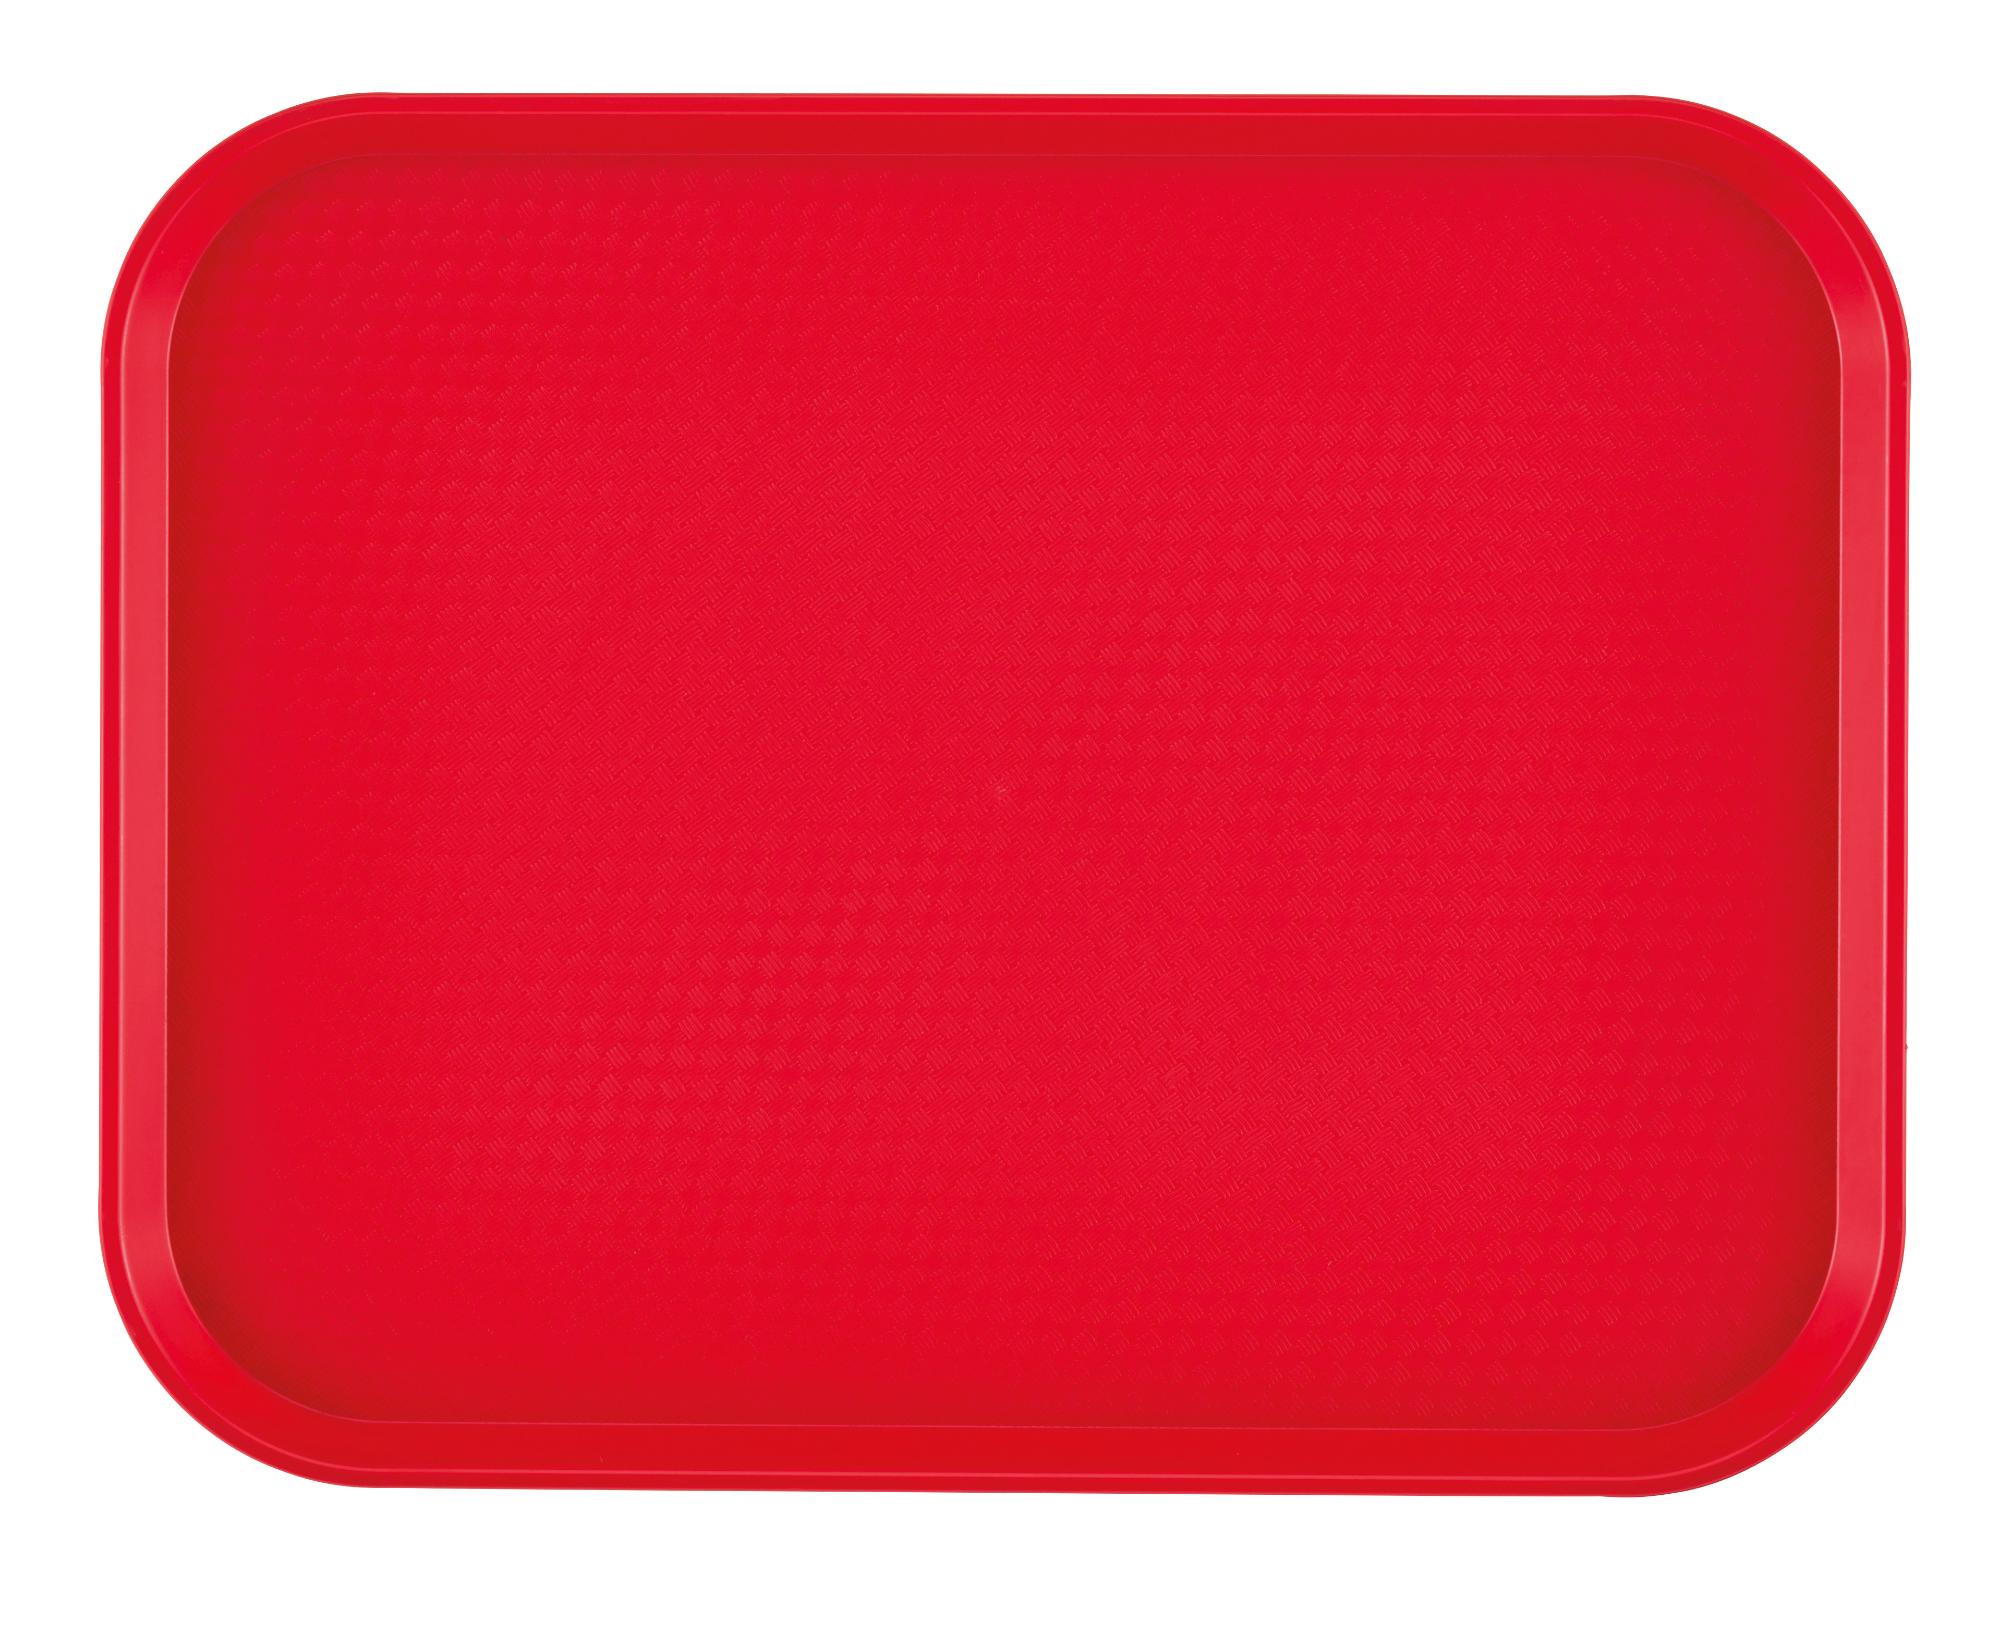 Fast Food polypropylene tray, textured surface, red, 300x410 mm